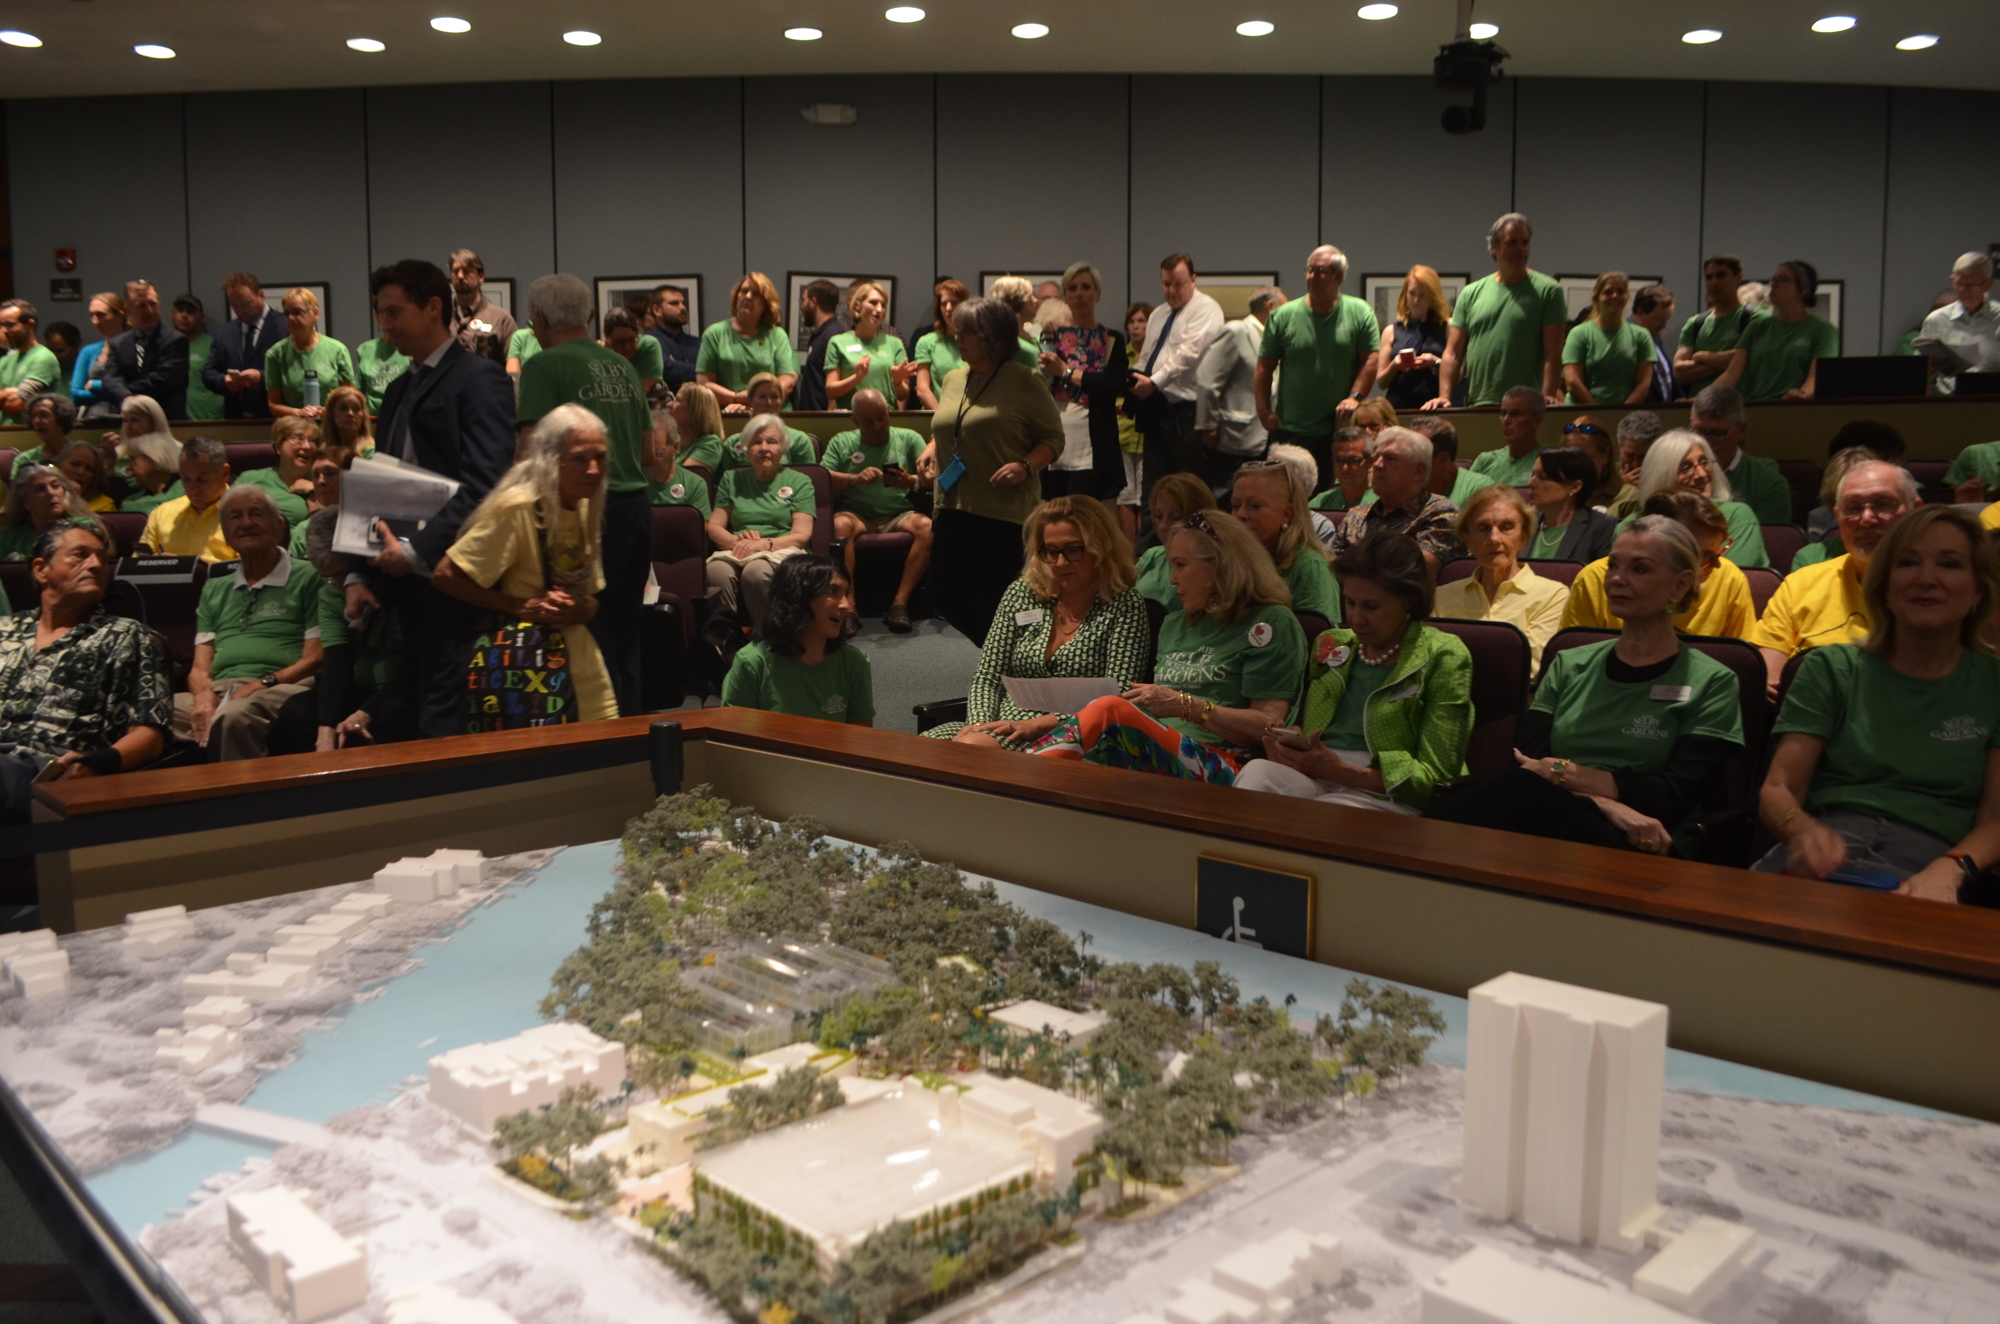 Months of discussions, recommendations, demonstrations and more came down to a 3-2 vote by the City Commission to deny a key portion of Selby Gardens’ proposed master plan, rejecting the attraction’s plan to redevelop its campus.